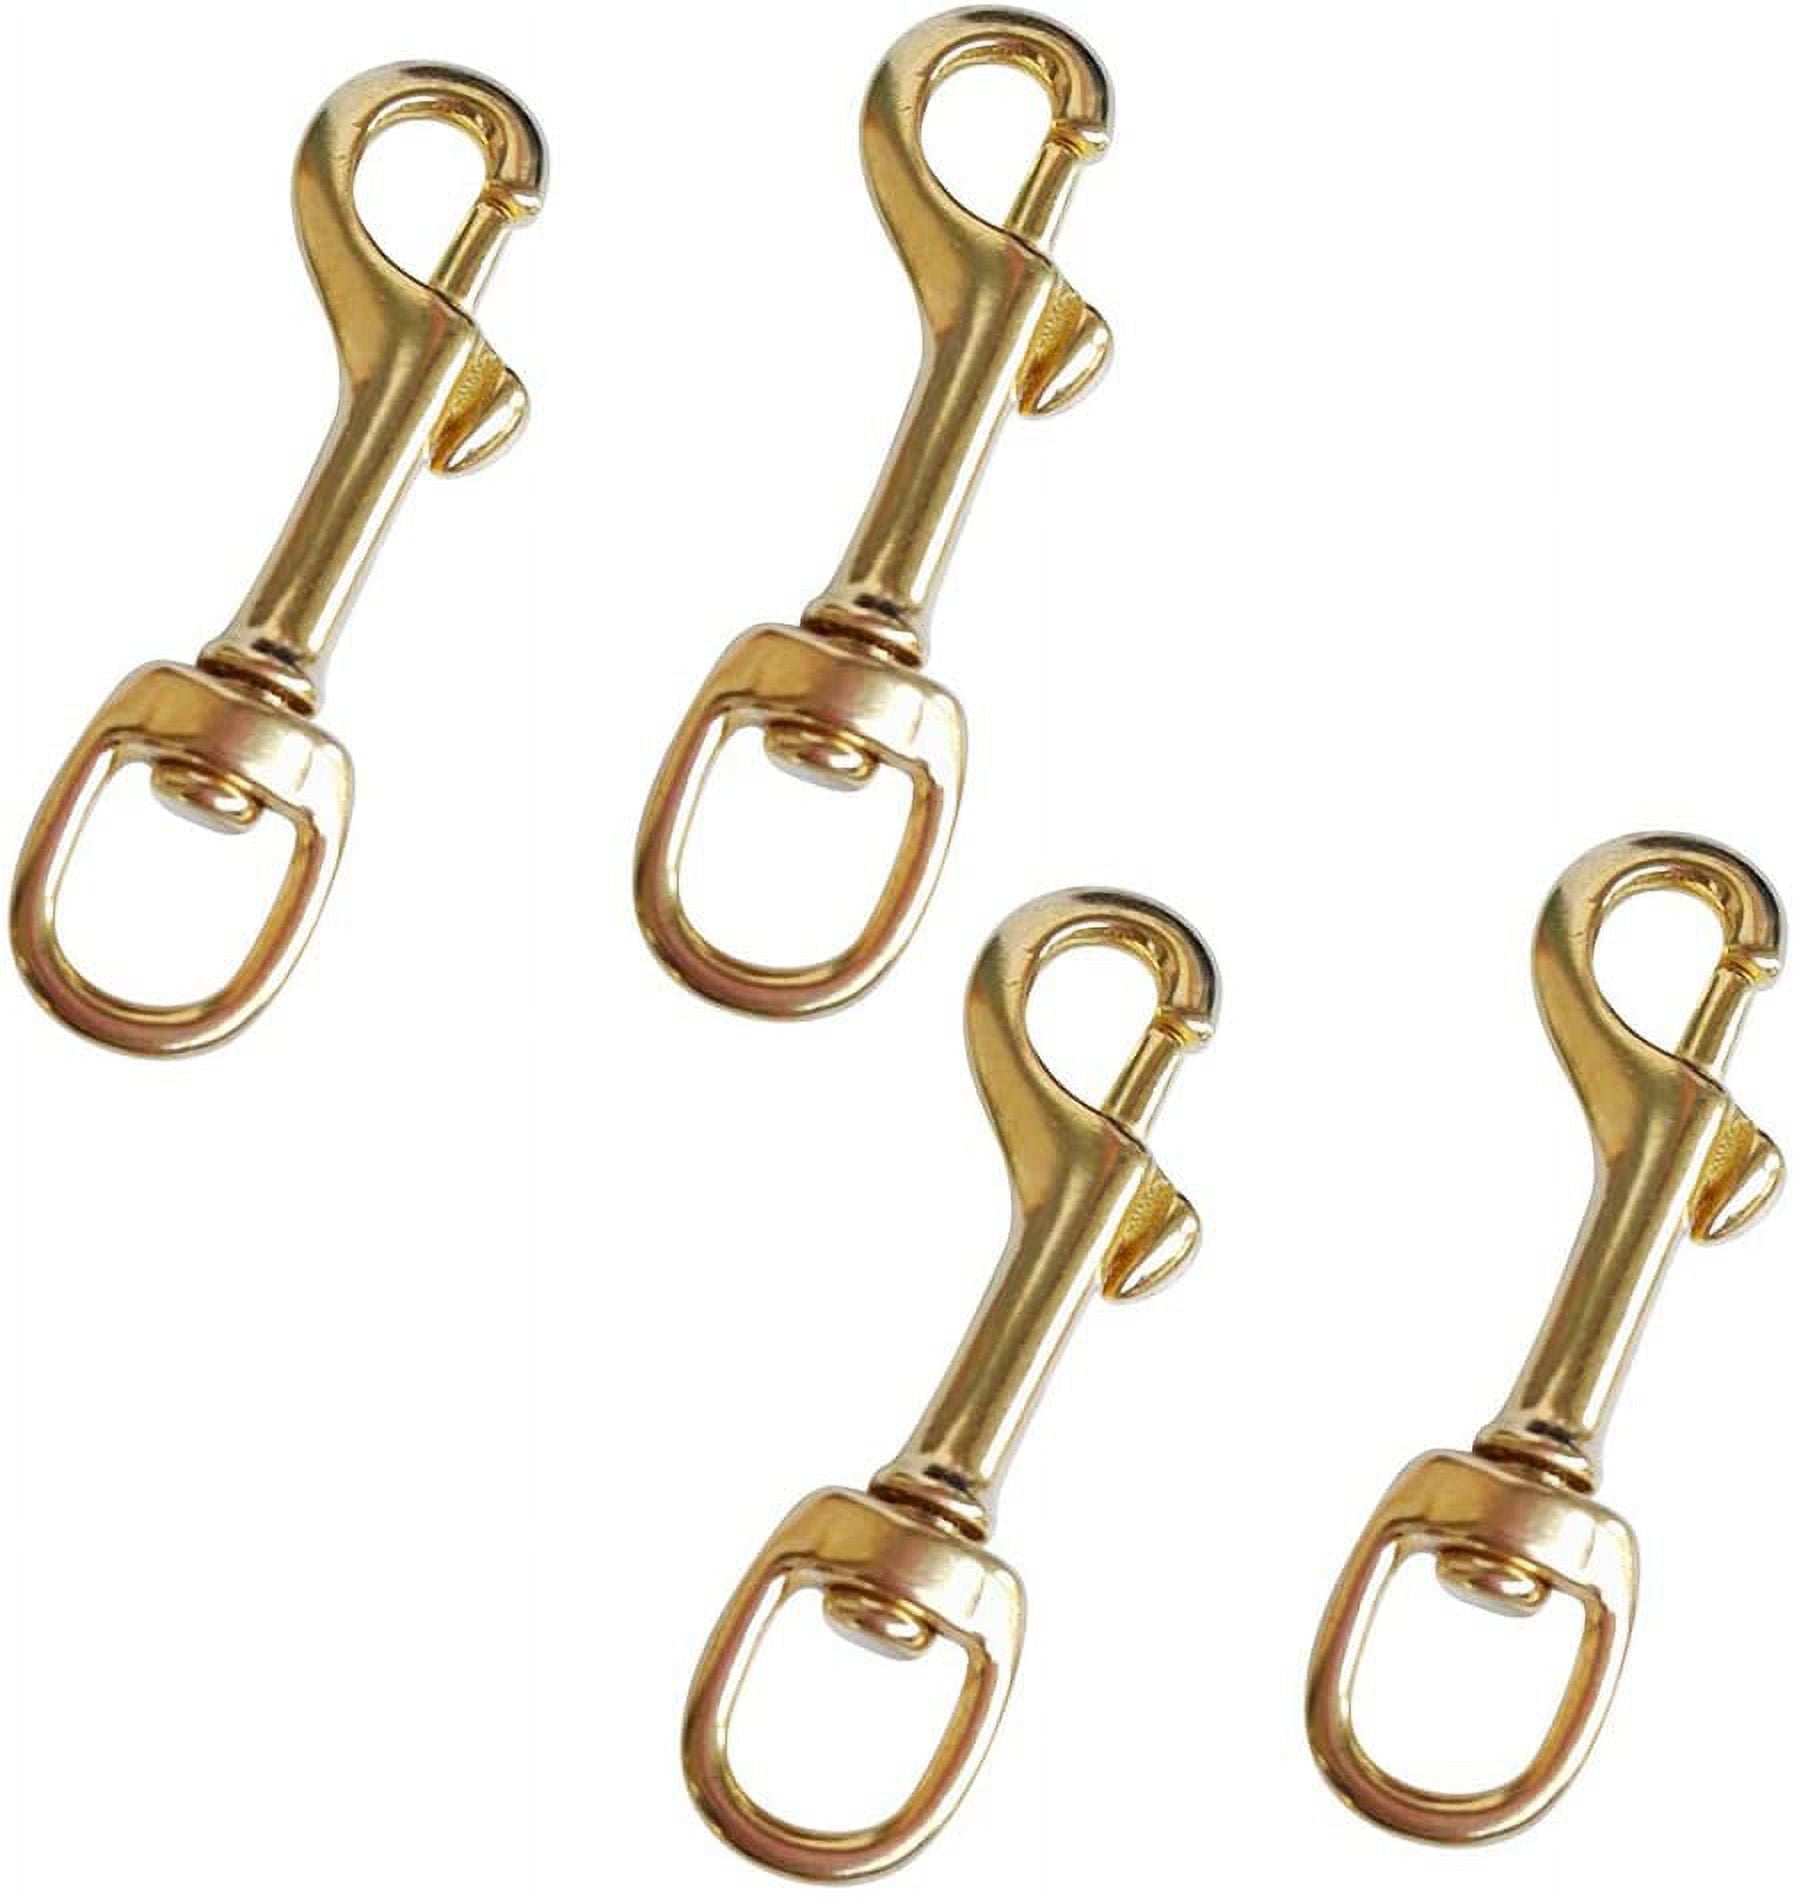 Swivel Large Eye Bolt Snap Hooks 2 Pieces, Heavy Duty Single Ended Trigger  Snap Clips Marine Grade 316 Stainless Steel Buckles Clasp for Scuba Diving